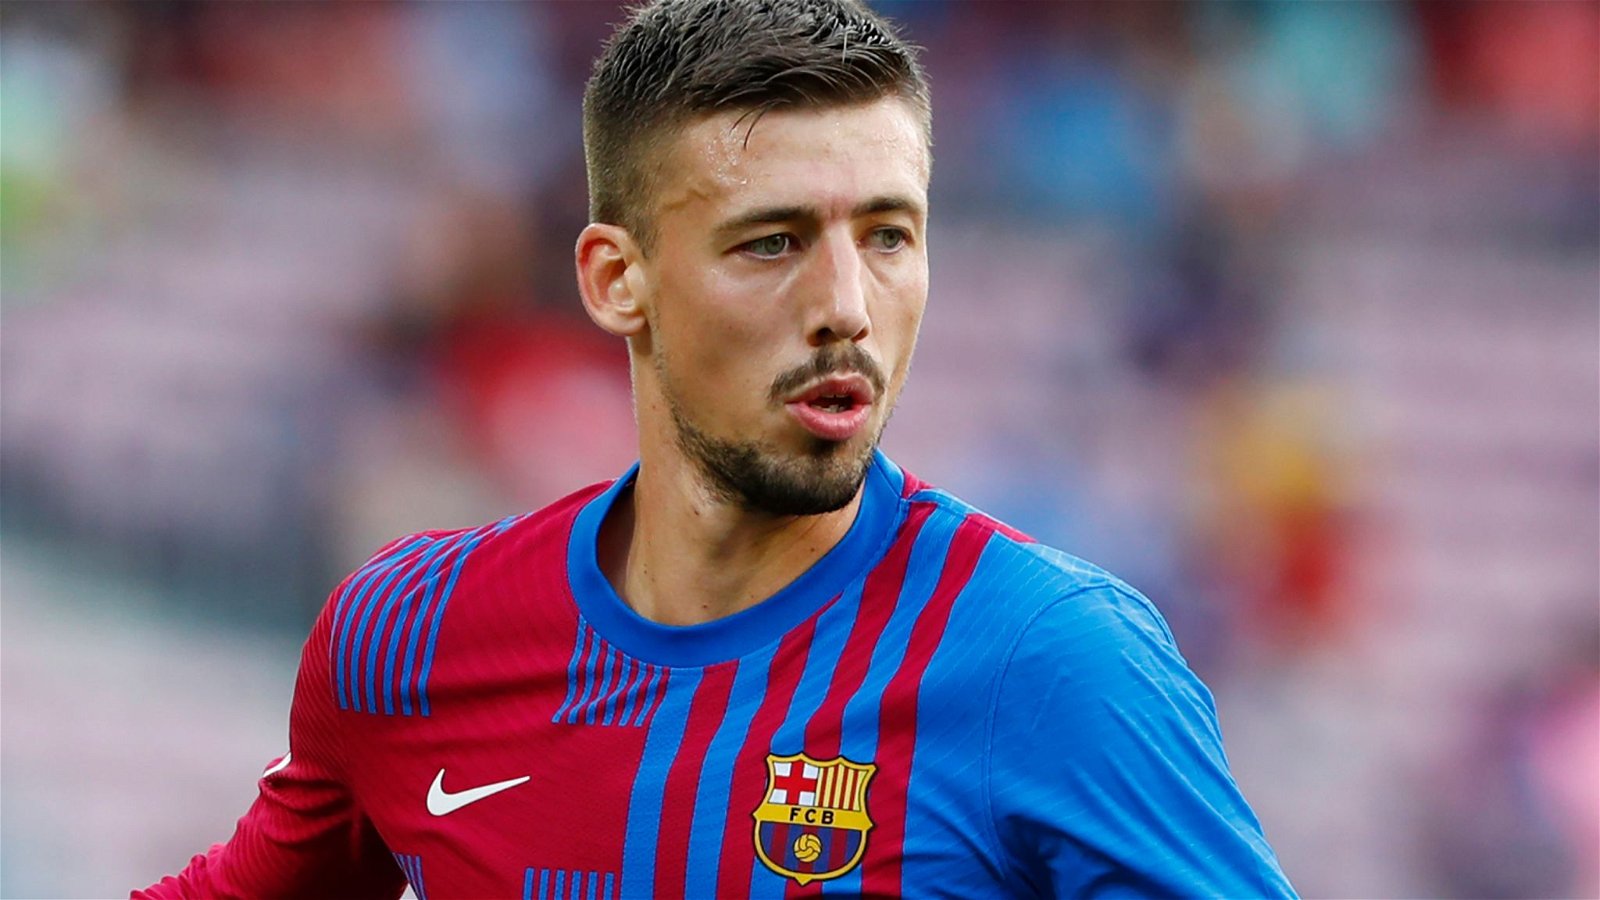 Spurs confirm parting ways with Clement Lenglet as he will return back to Camp Nou